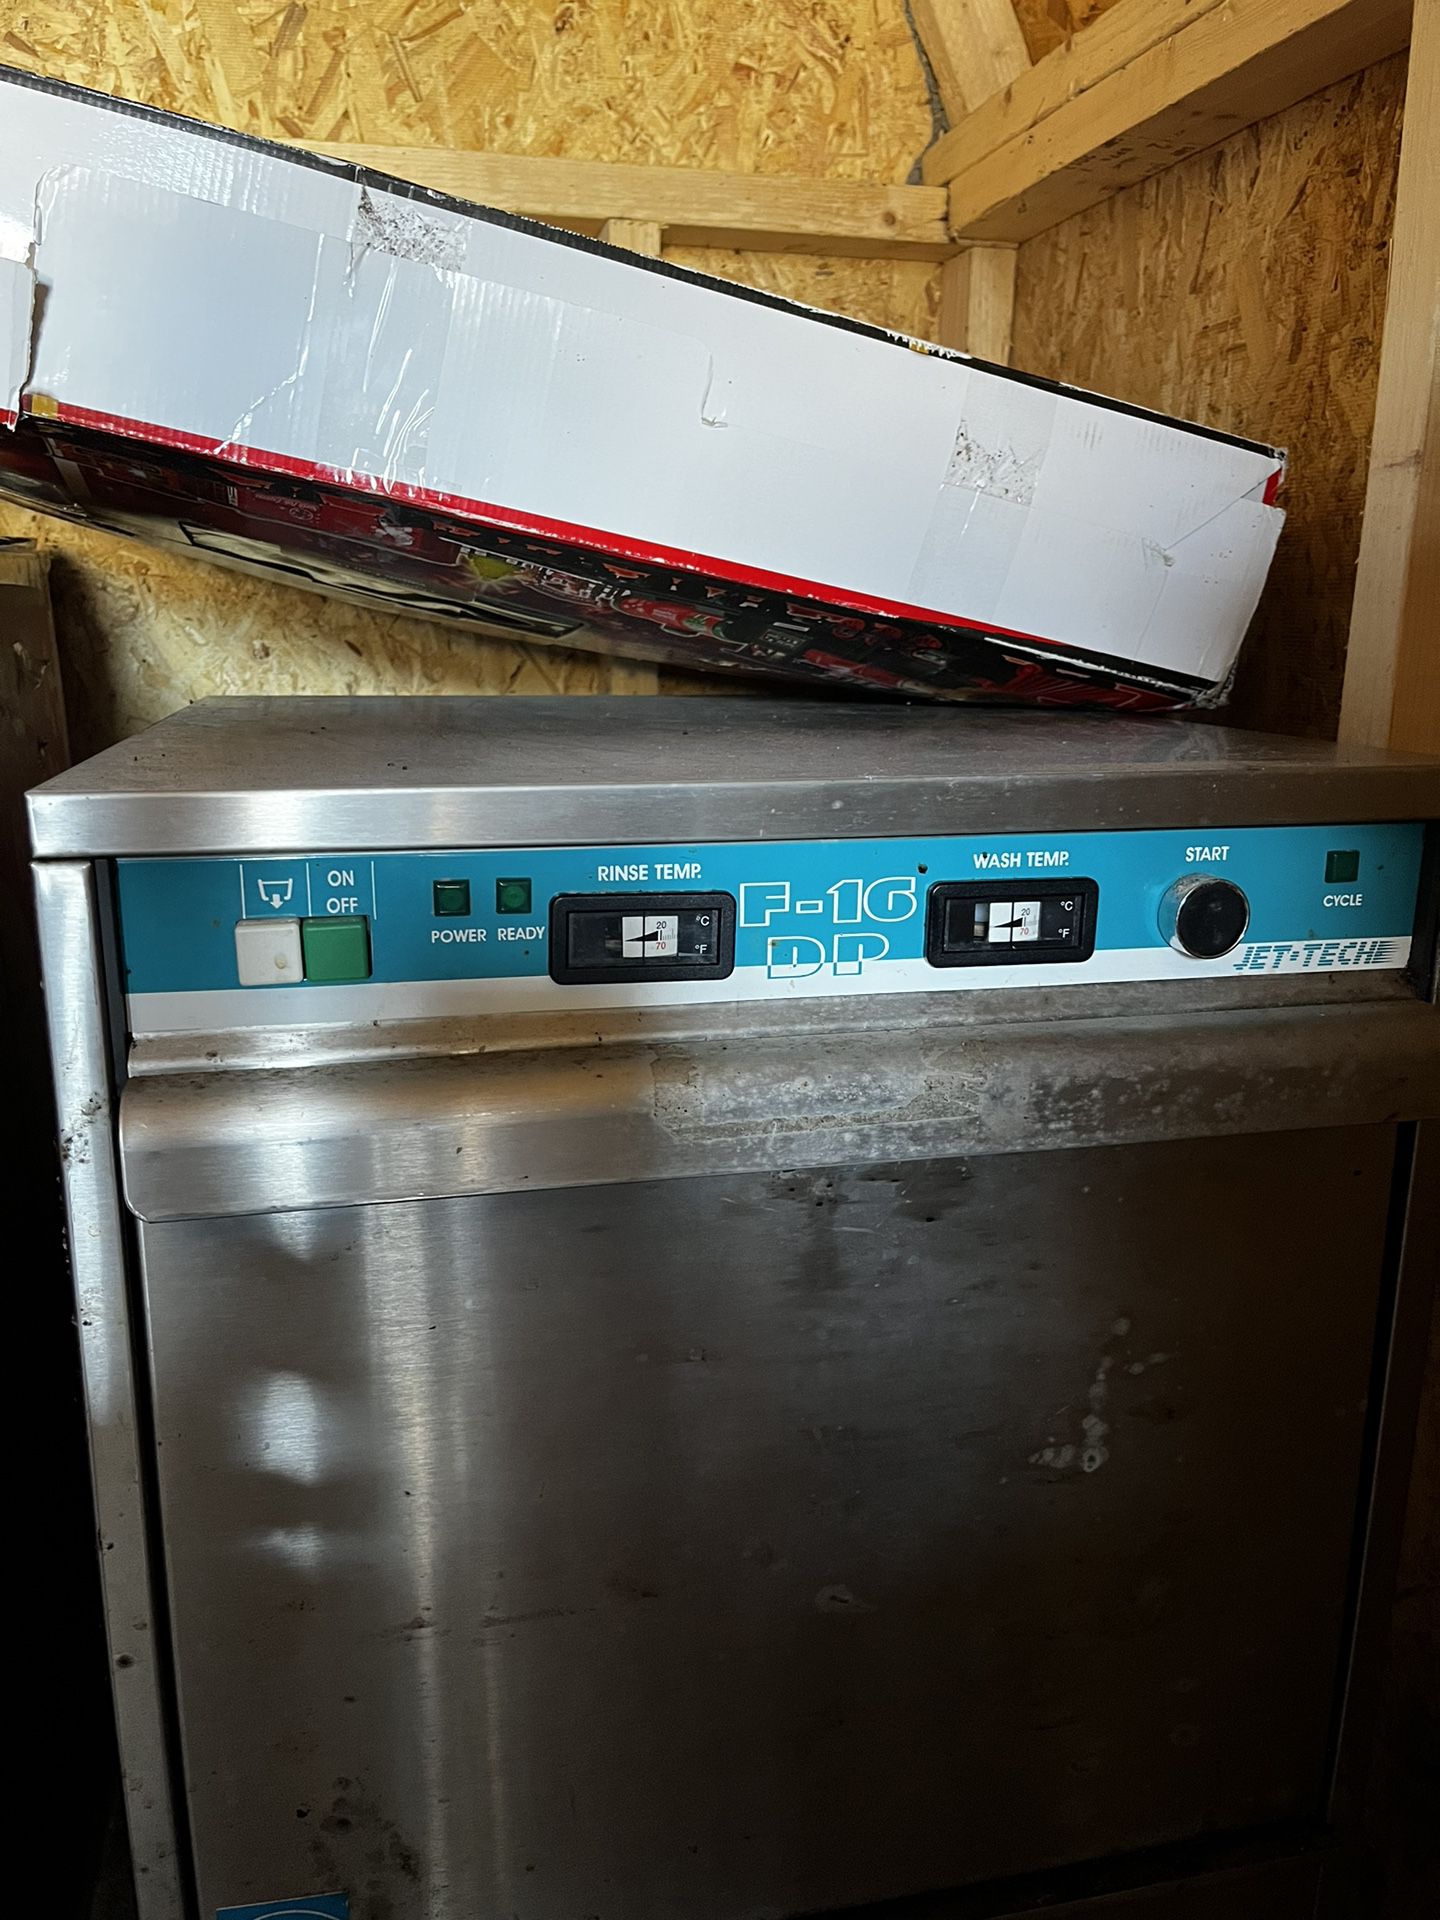 Jet Tech Commercial Under counter Dishwasher